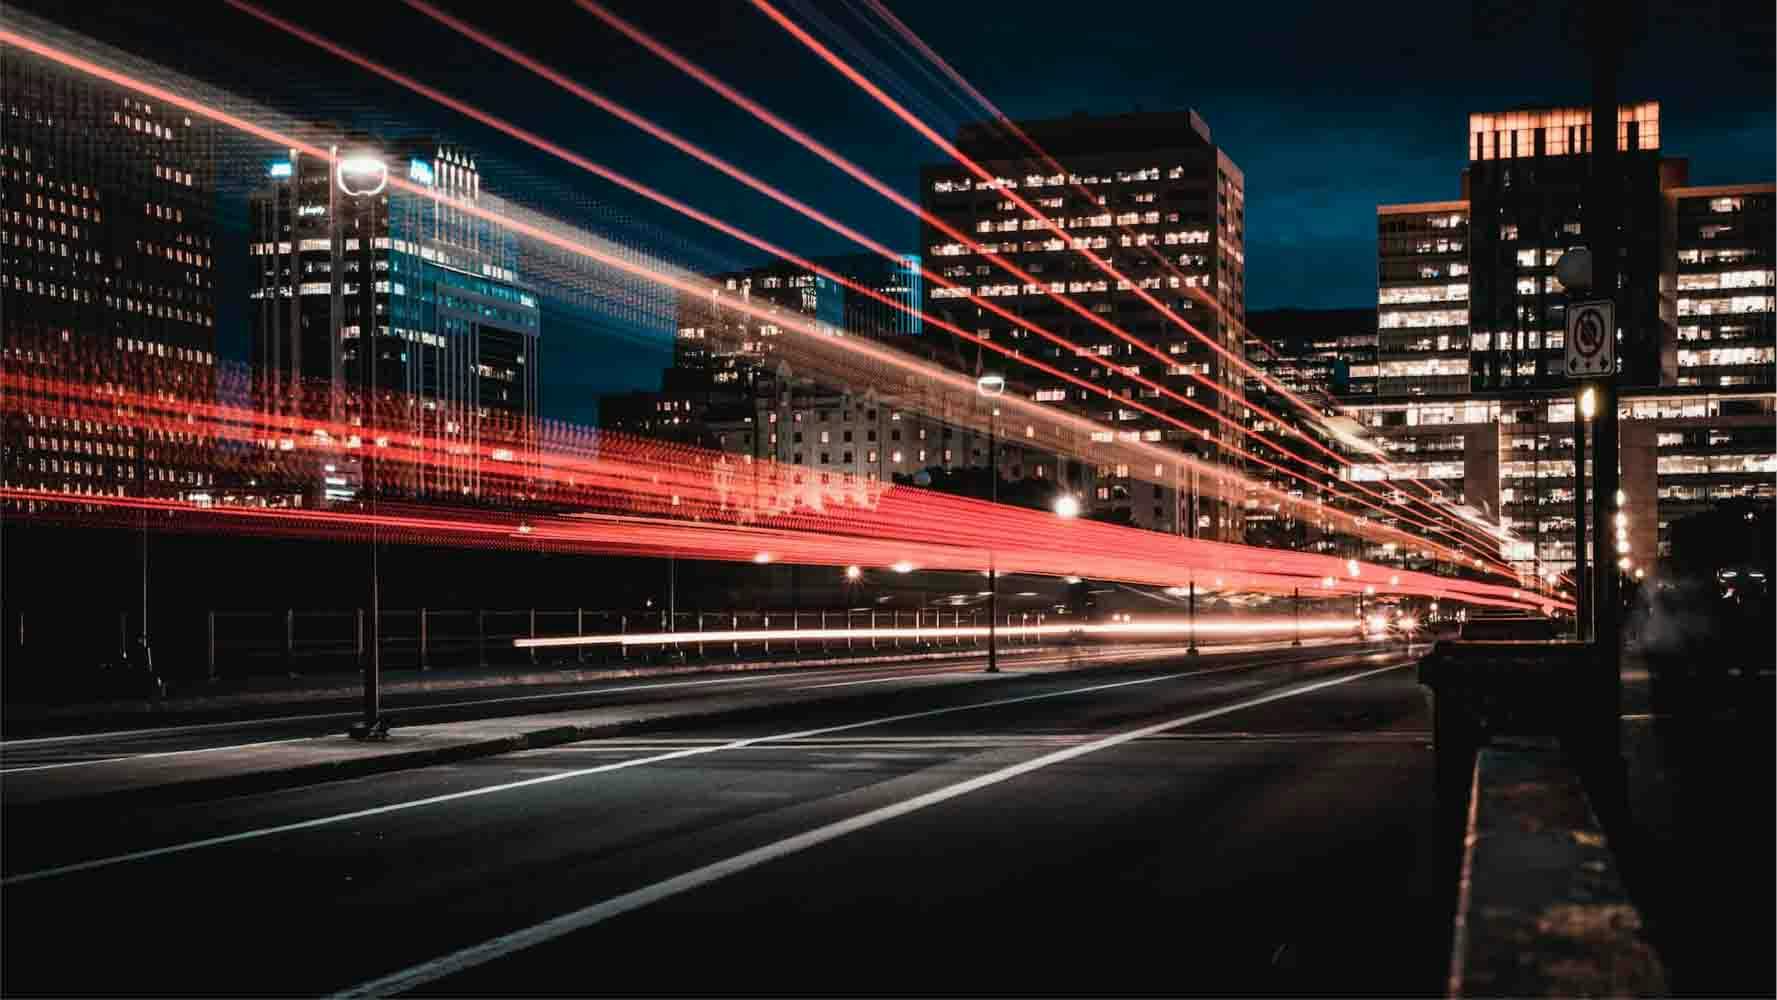 Long exposure photography of road and cars in a city by night